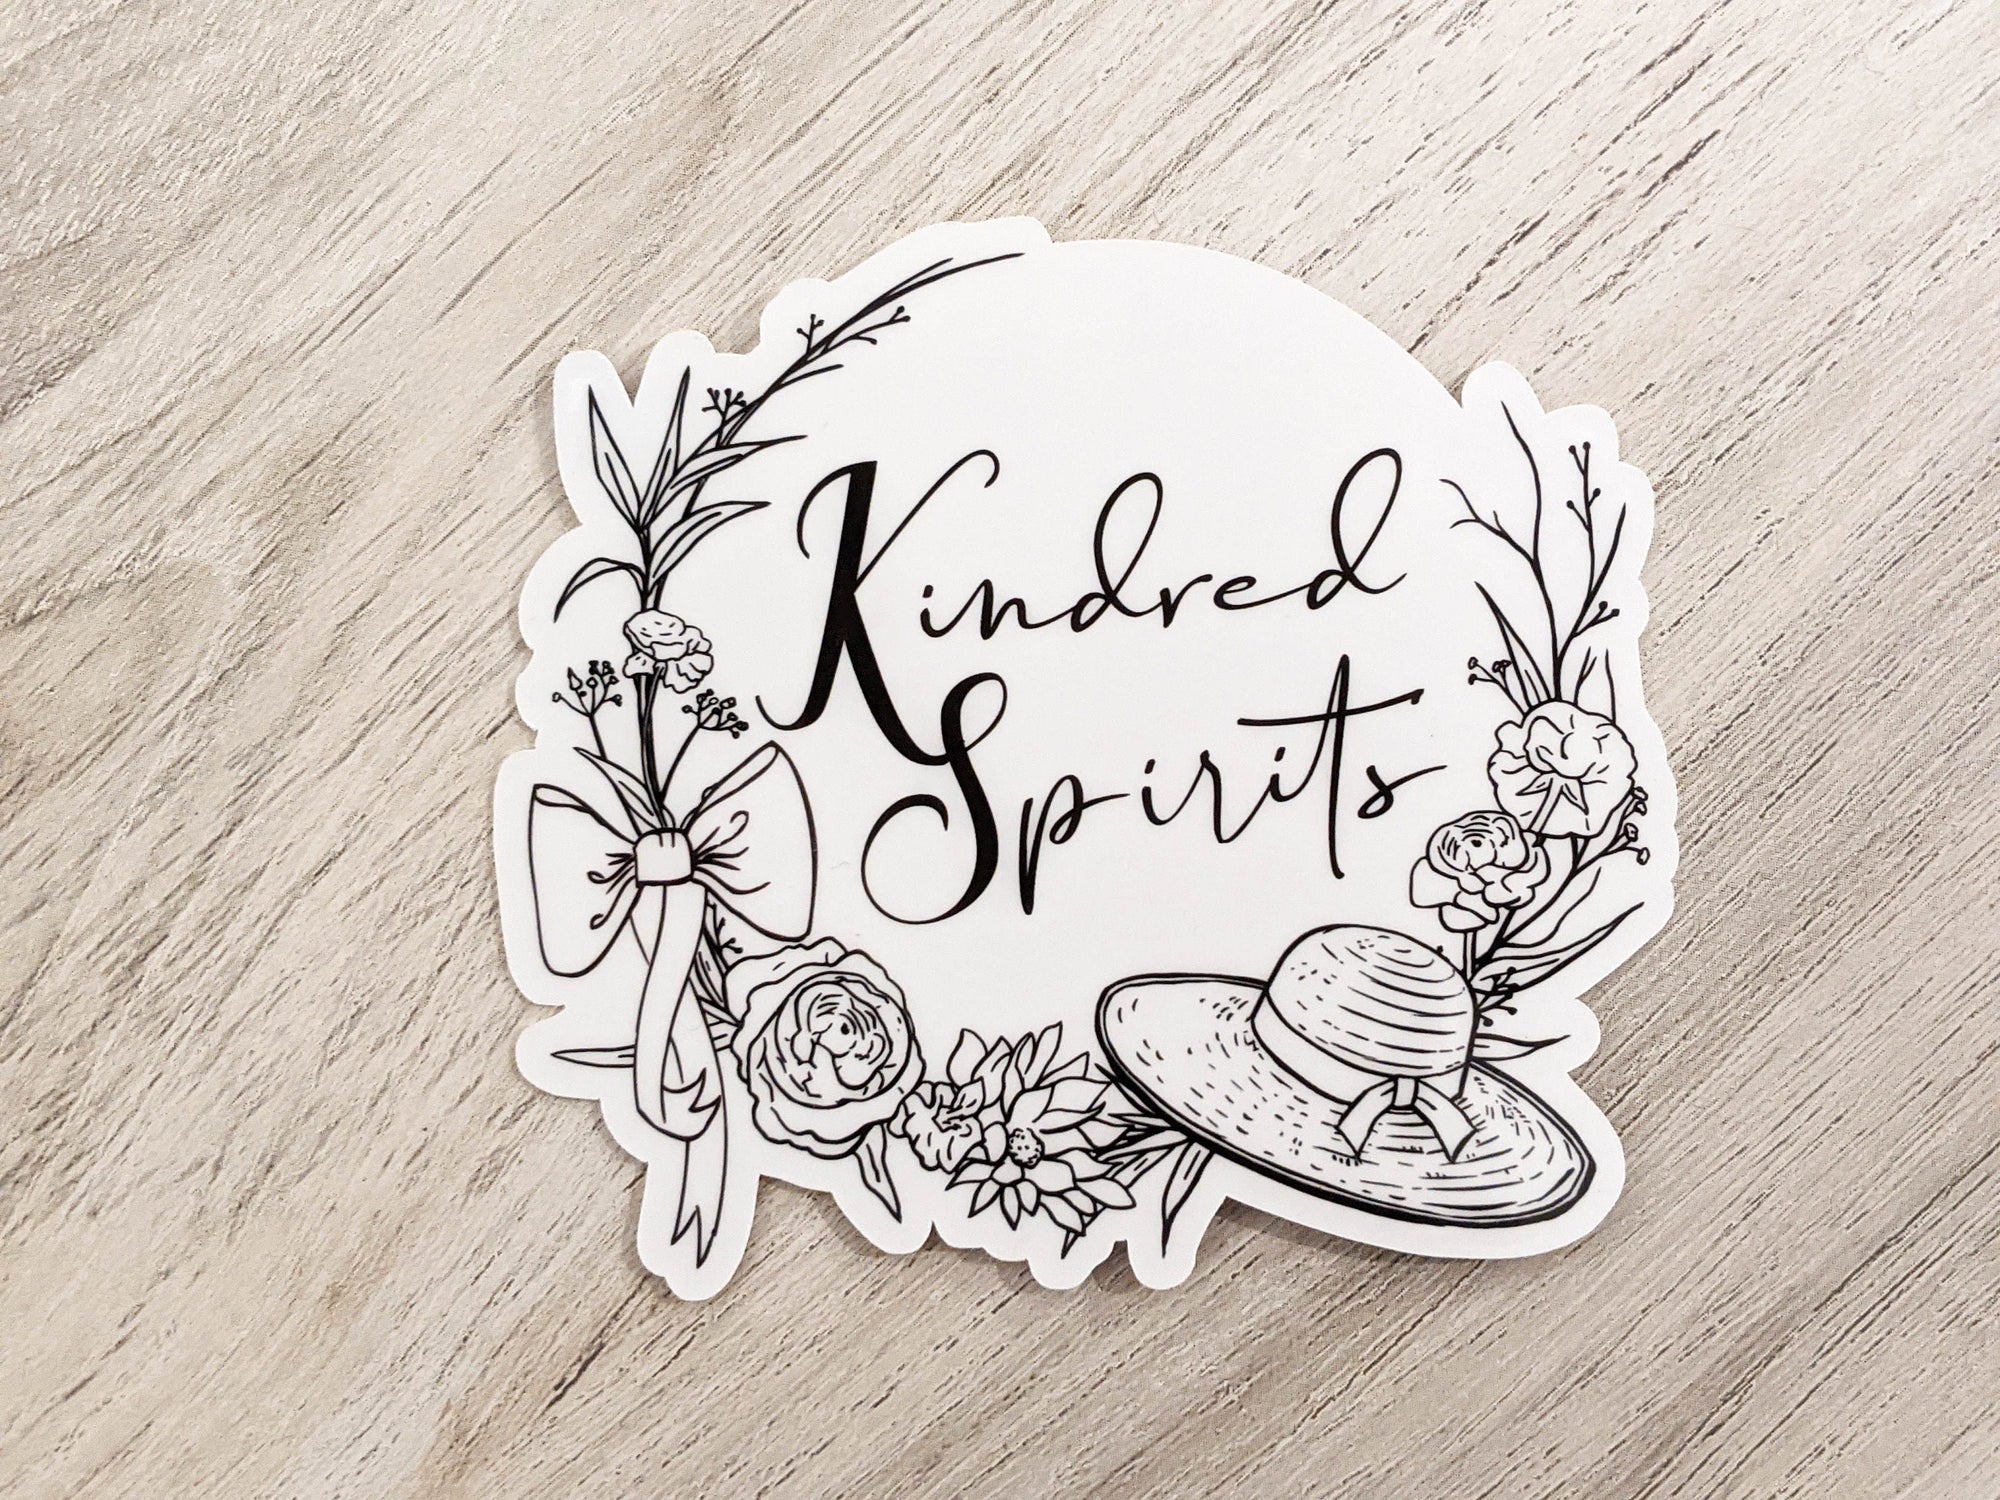 Kindred Spirits Sticker from Anne of Green Gables